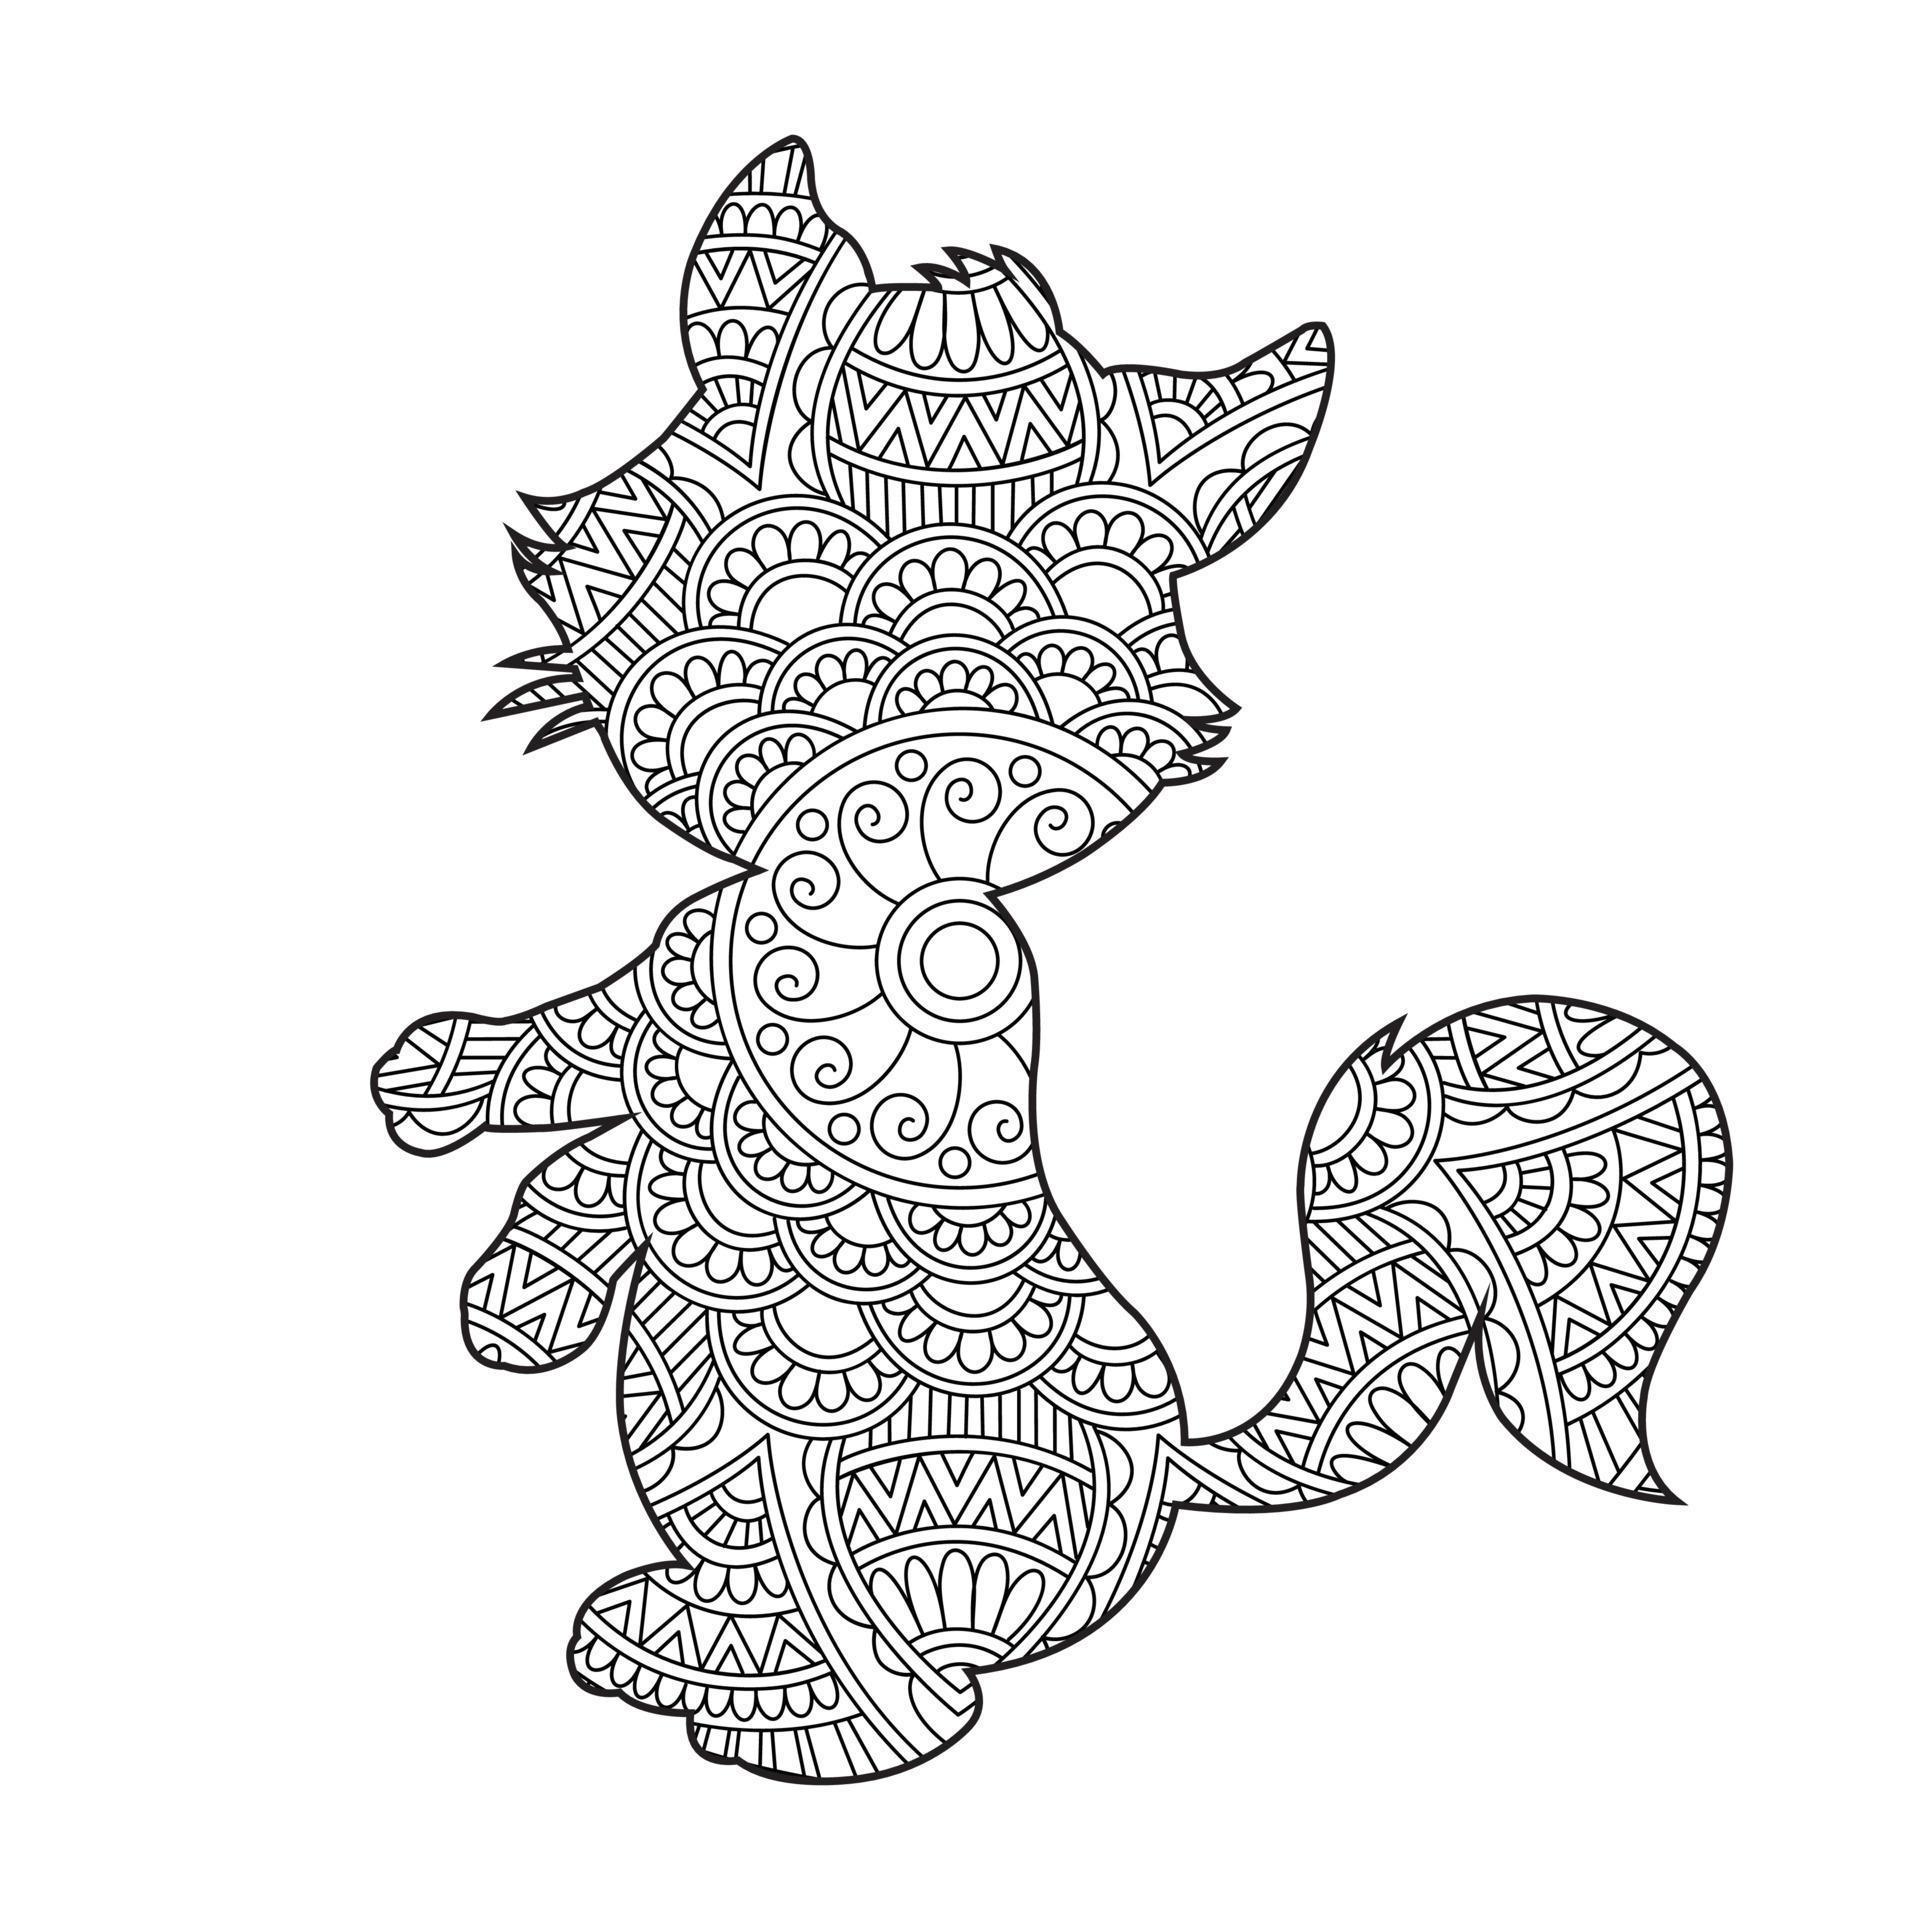 Cat Mandala Coloring Page for Adults Floral Animal Coloring Book ...